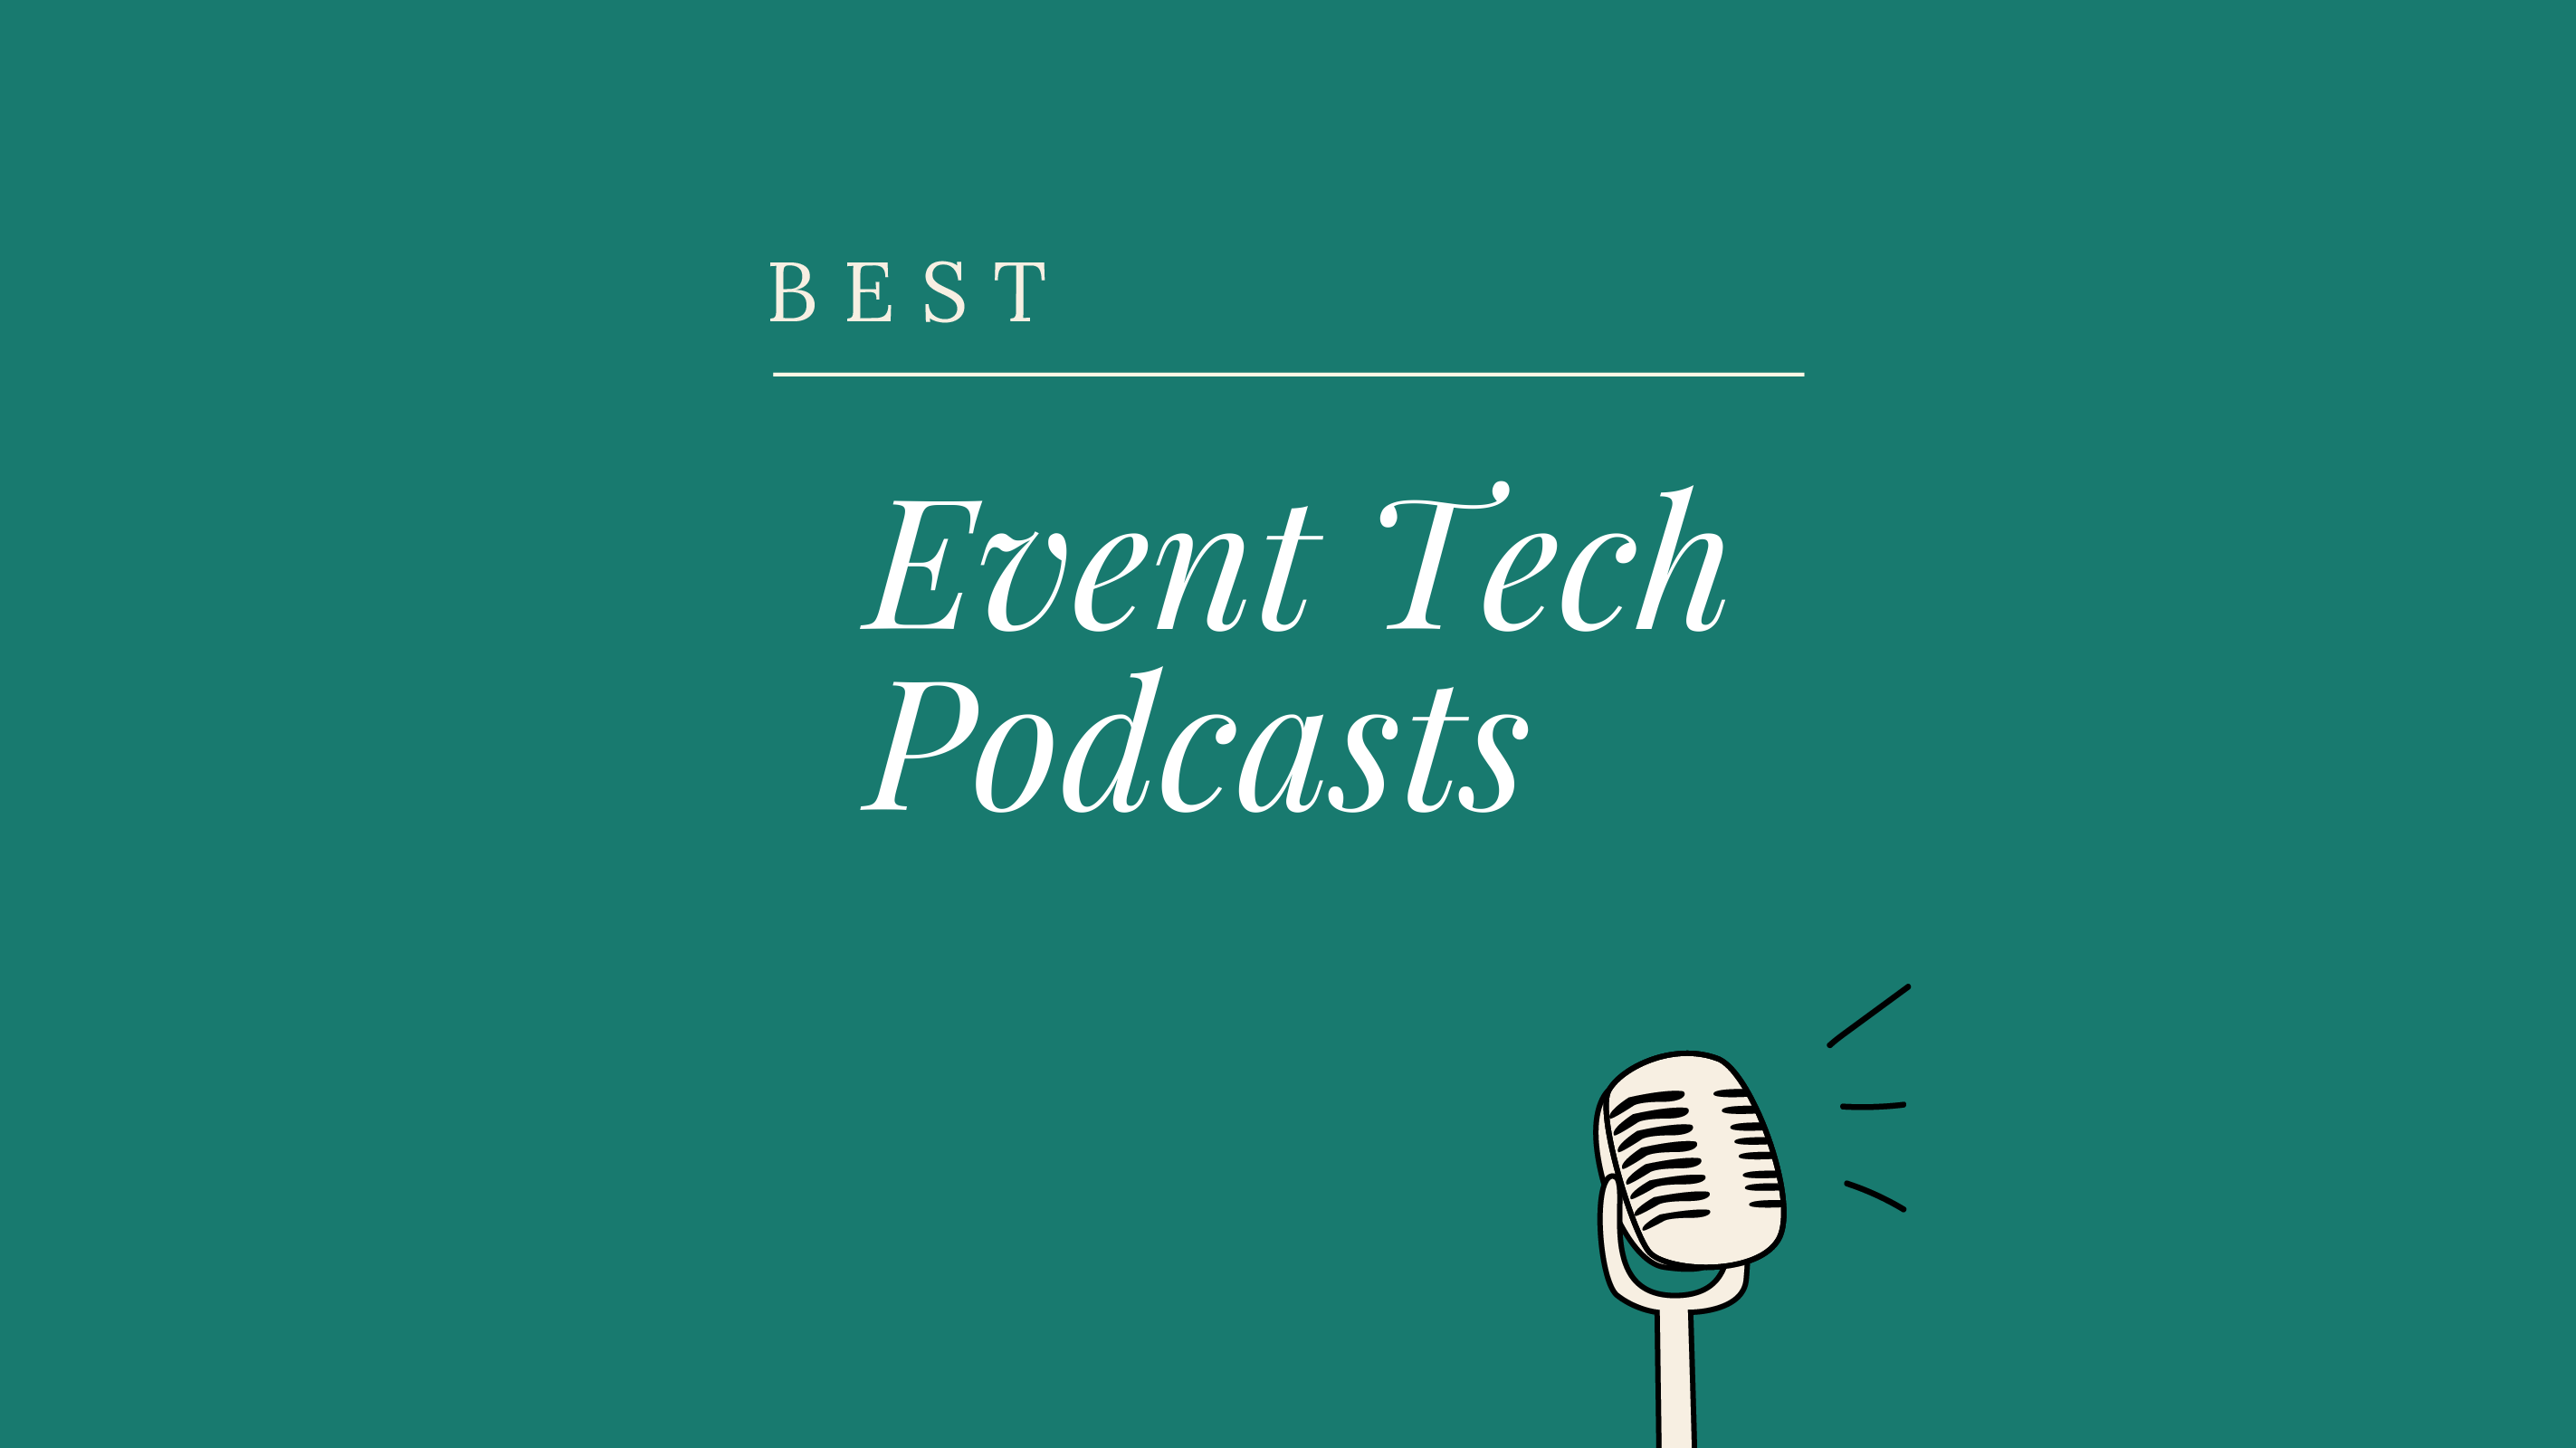 HOT-event-tech-podcasts-featured-image-1931